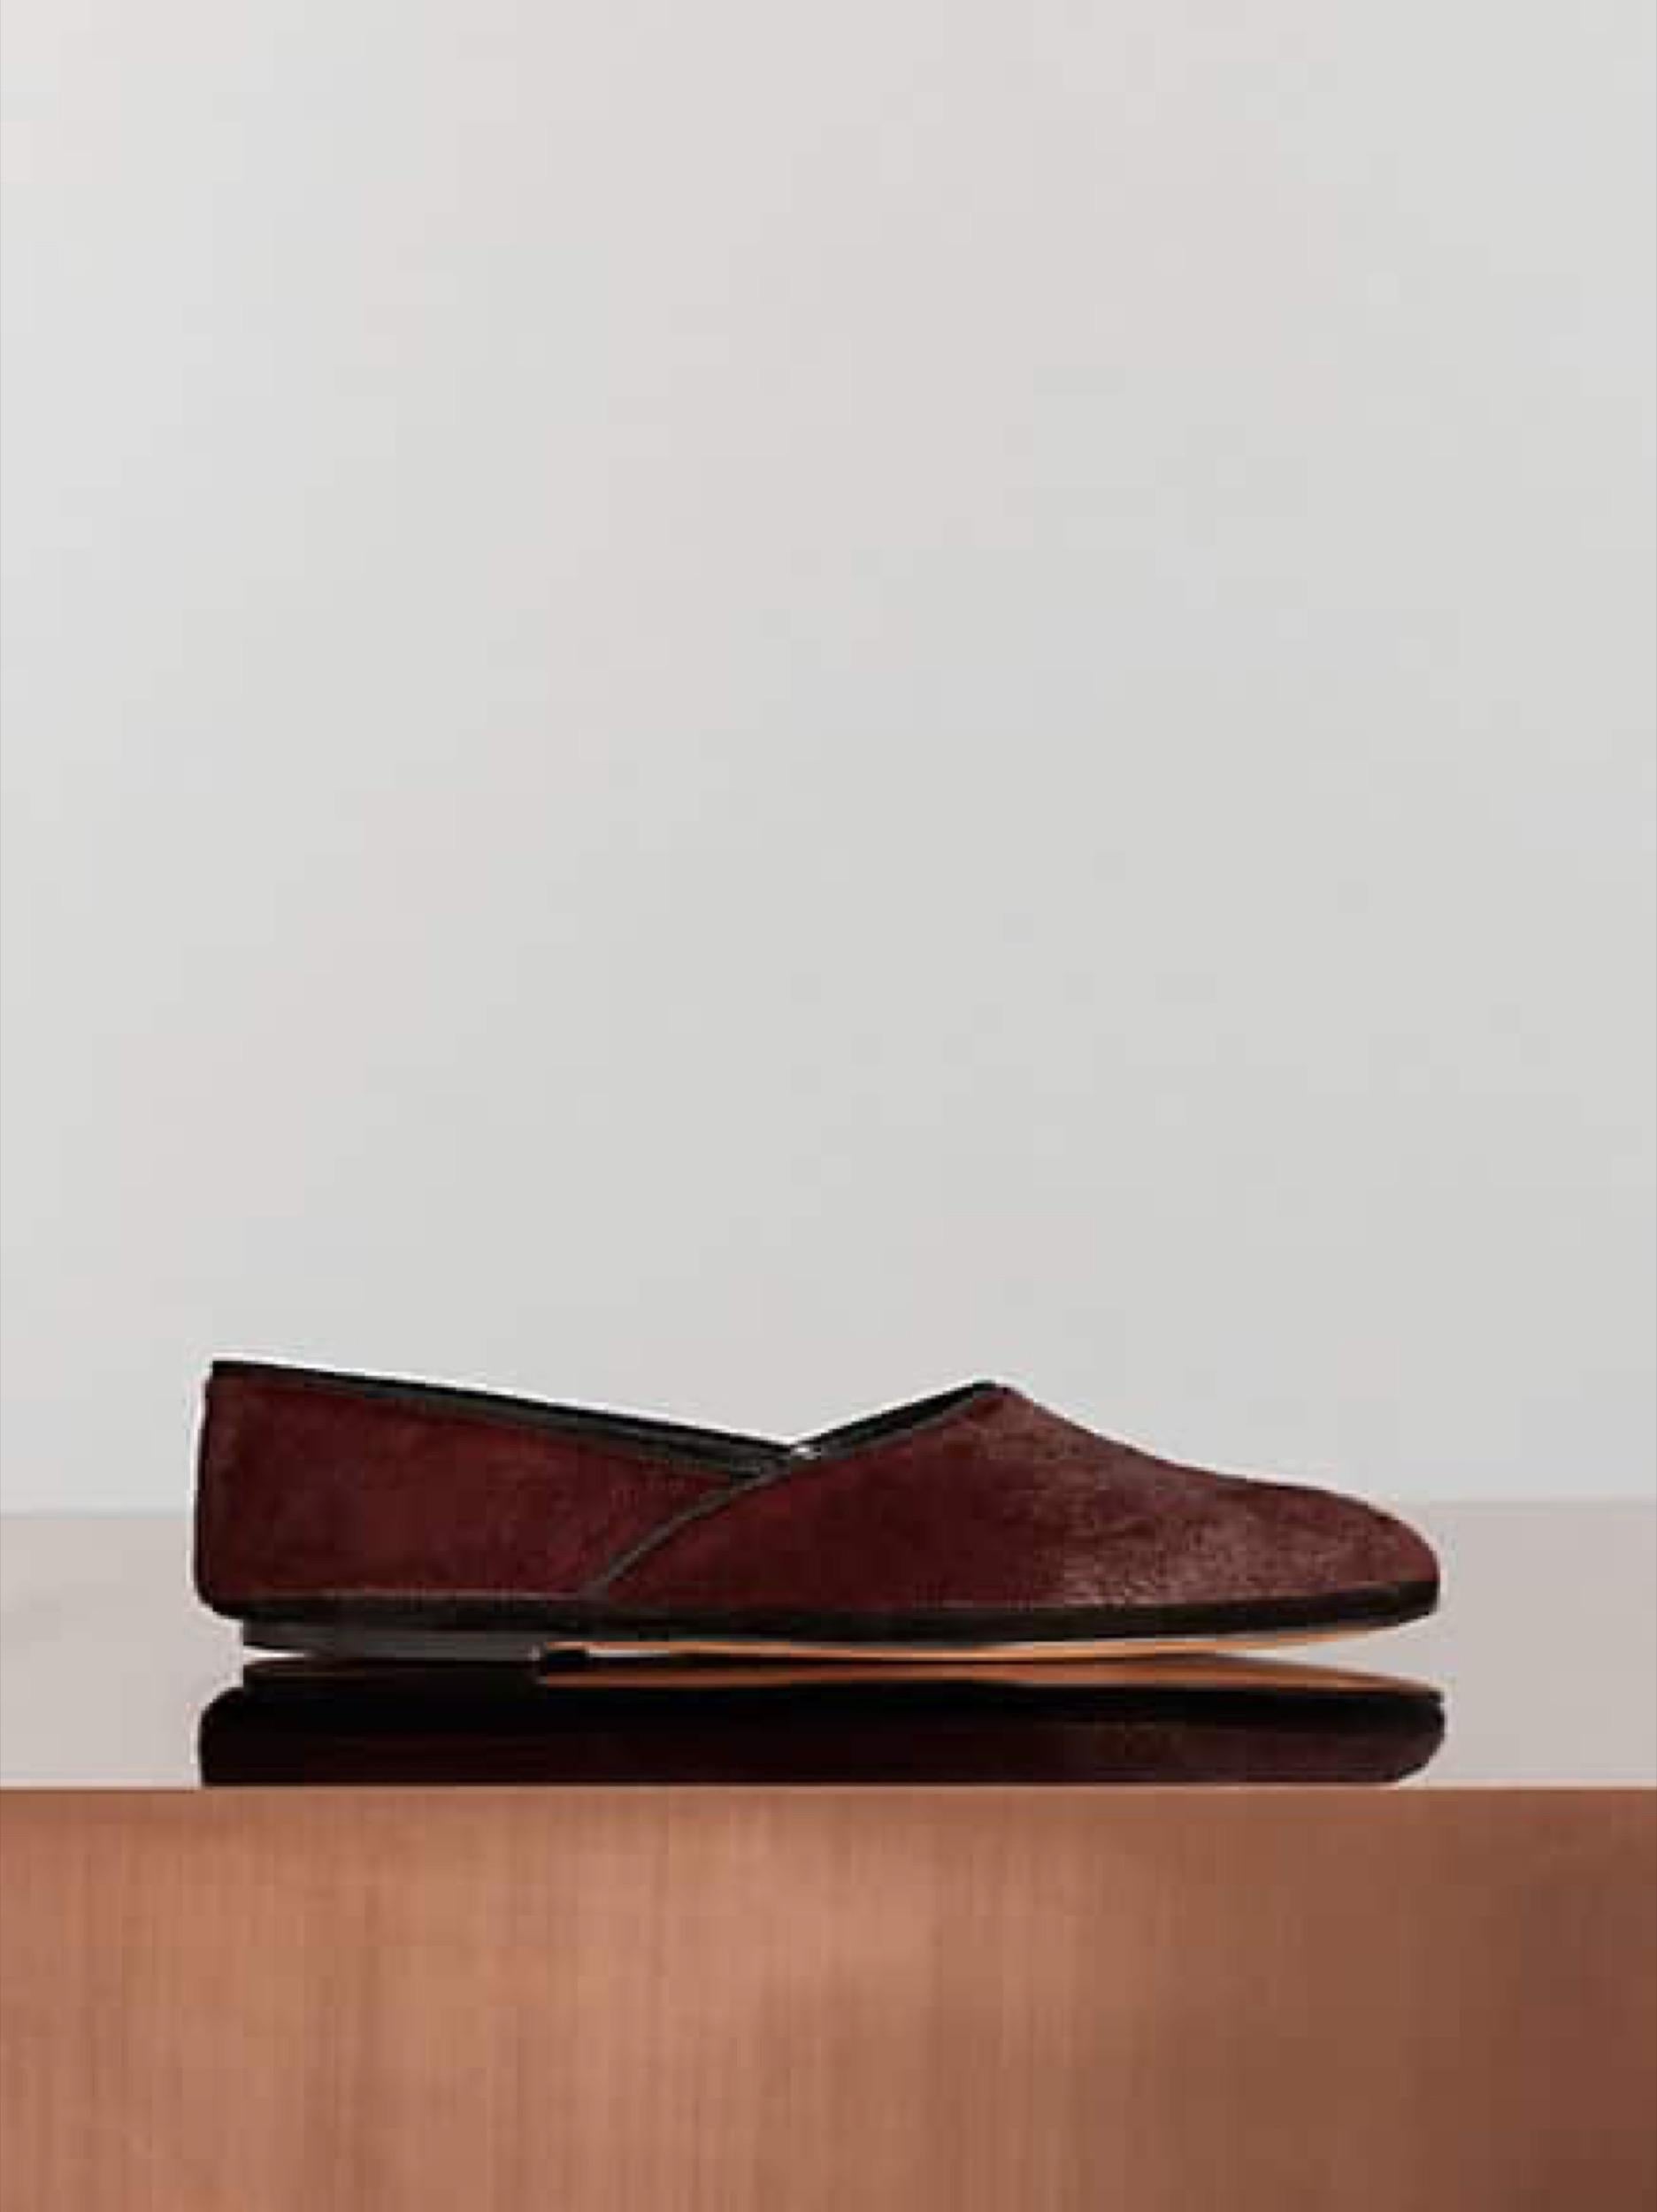 Size: 38, Fits Large (Céline from this era often runs large, you can take a full size down)
Insole: 10 inches
Heel: Flat
Composition:
Pony Hair, Leather
Details:
Burgundy / Deep Red Ponyhair, Black leather insole, soft sueded sole
Flexible and